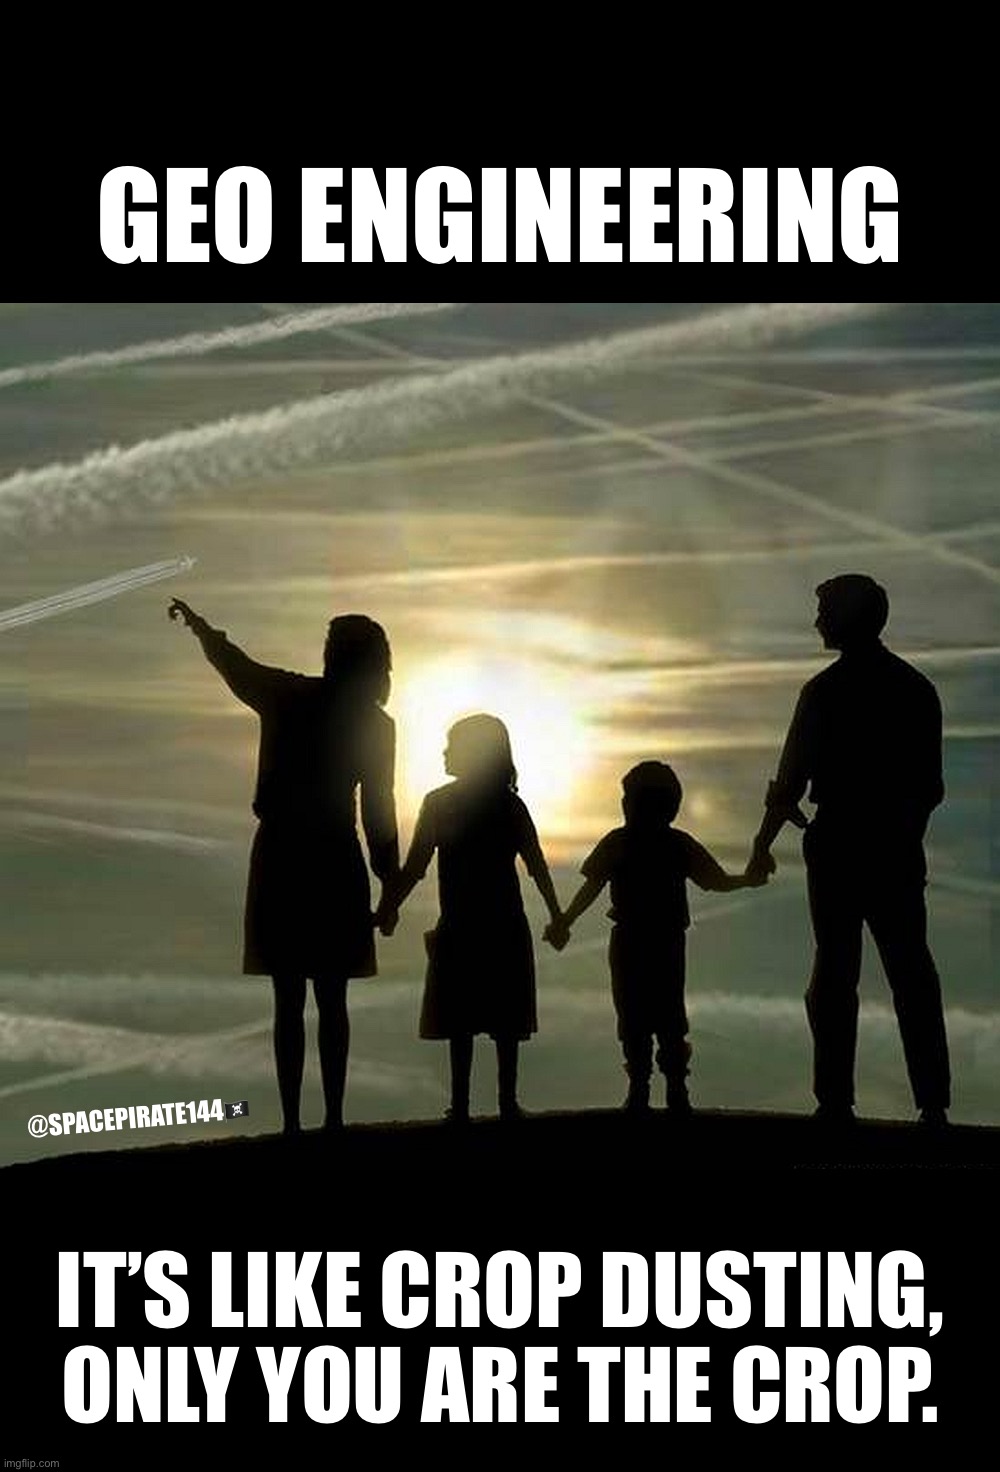 Geo Engineering | GEO ENGINEERING; @SPACEPIRATE144🏴‍☠️; IT’S LIKE CROP DUSTING,
ONLY YOU ARE THE CROP. | image tagged in geoengineering,geo engineering,crop dusting,chemtrails | made w/ Imgflip meme maker